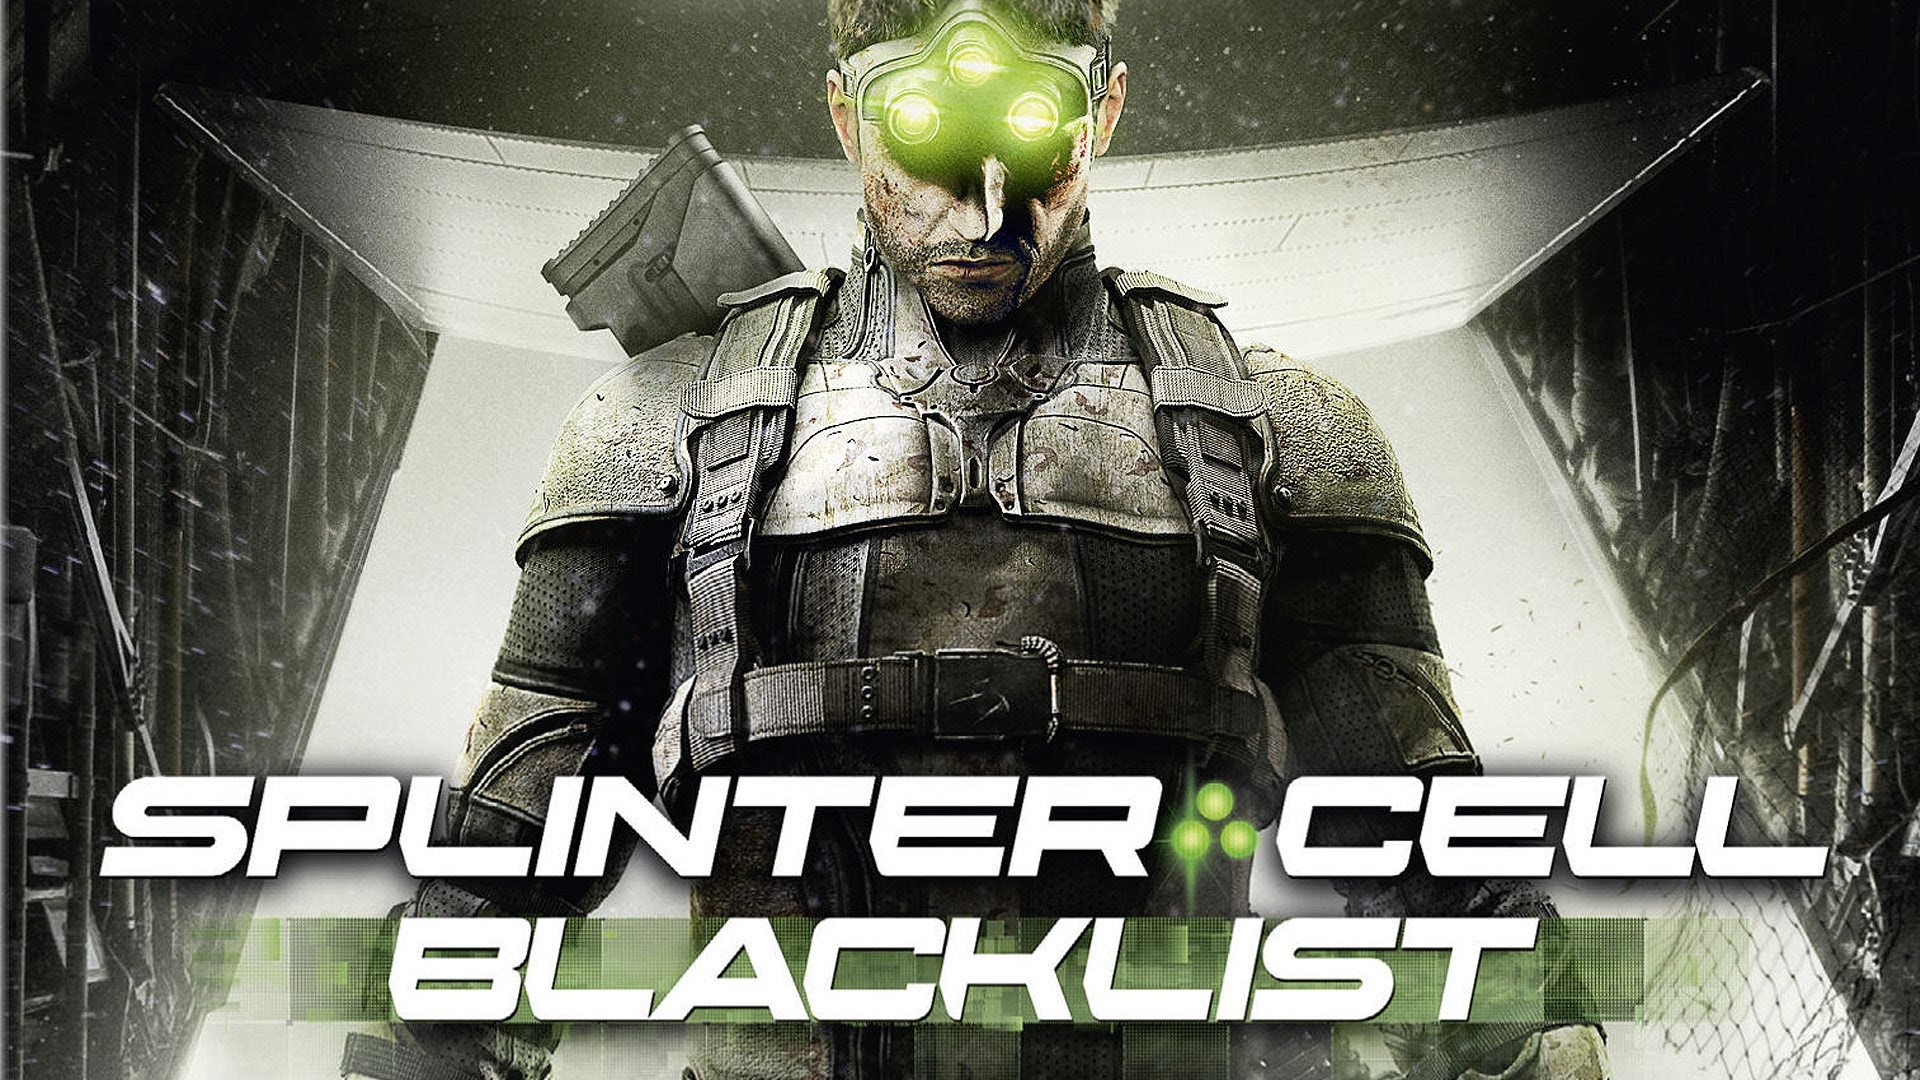 Amazing Tom Clancy's Splinter Cell: Blacklist Pictures & Backgrounds